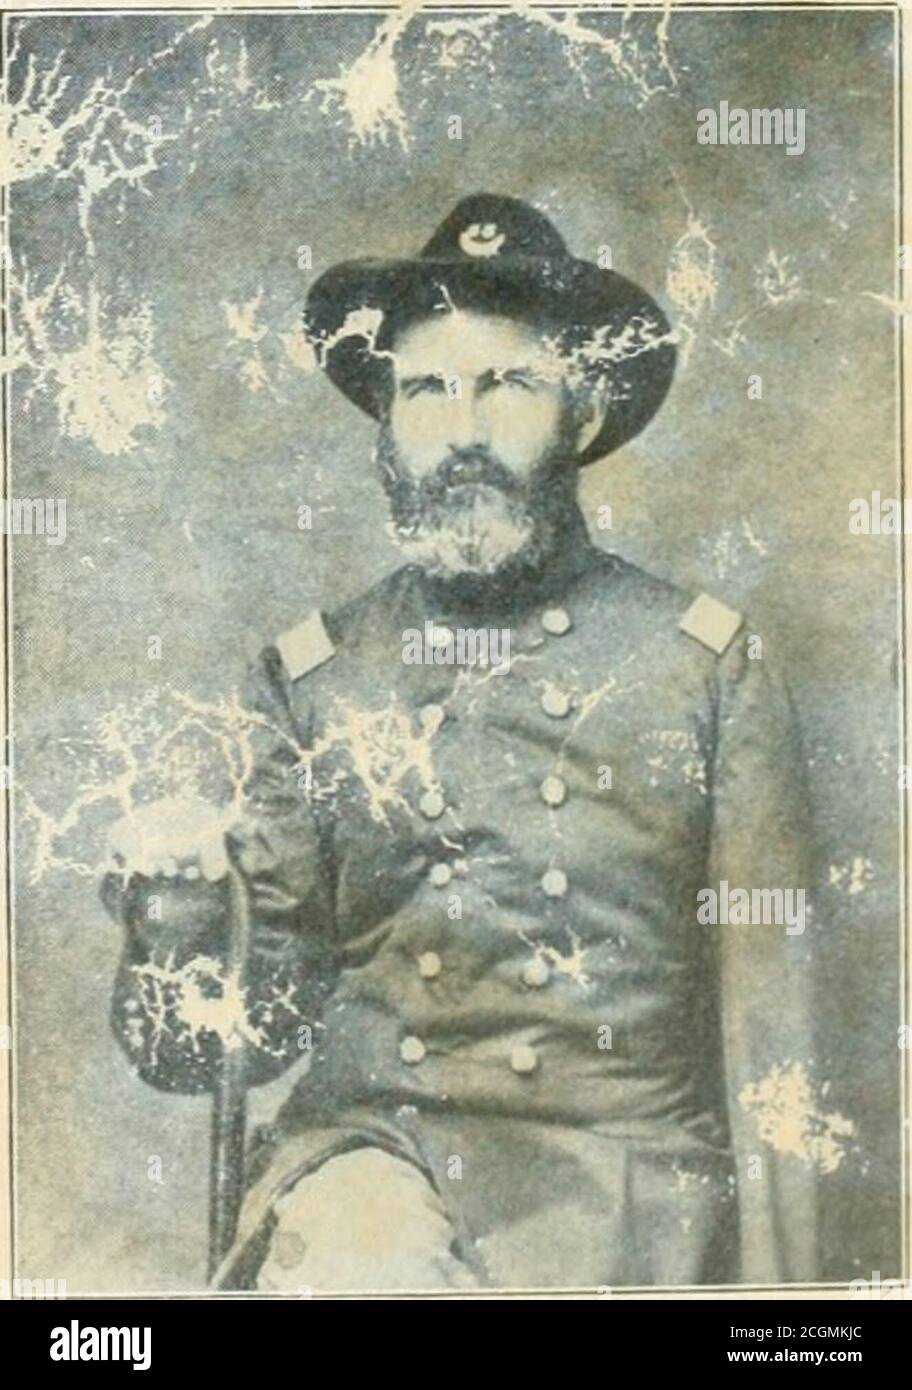 . Trials and triumphs : the record of the Fifty-Fifth Ohio Volunteer Infantry . George H. Sa.fford Lieutenant-Colonel, P.ifty-Fifth Ohio Volunteer Inf^-ntry. , .MF-S ^^. ^TFAENS LlLLTlNA- T-COLO-TEI, FlFTY-FlFTH (JllIO oLUKTFER INFANTRY i86i] ORGANIZATION Quartermaster Sergeant Benjamin C. Taber Commissary Sergeant James G. Millen Sergeant-Major Mahlon Lambert Noncom- Hospital Steward WilHam E. Childs missioned Leader of the Band and | ^^^^^^^ ^ 3^^^ Staff Principal Musician 1 Second Principal Musician Peter Remming Band Company A Captain Charles B. Gambee ] ist Lieutenant Benjamin F. Eldridg Stock Photo